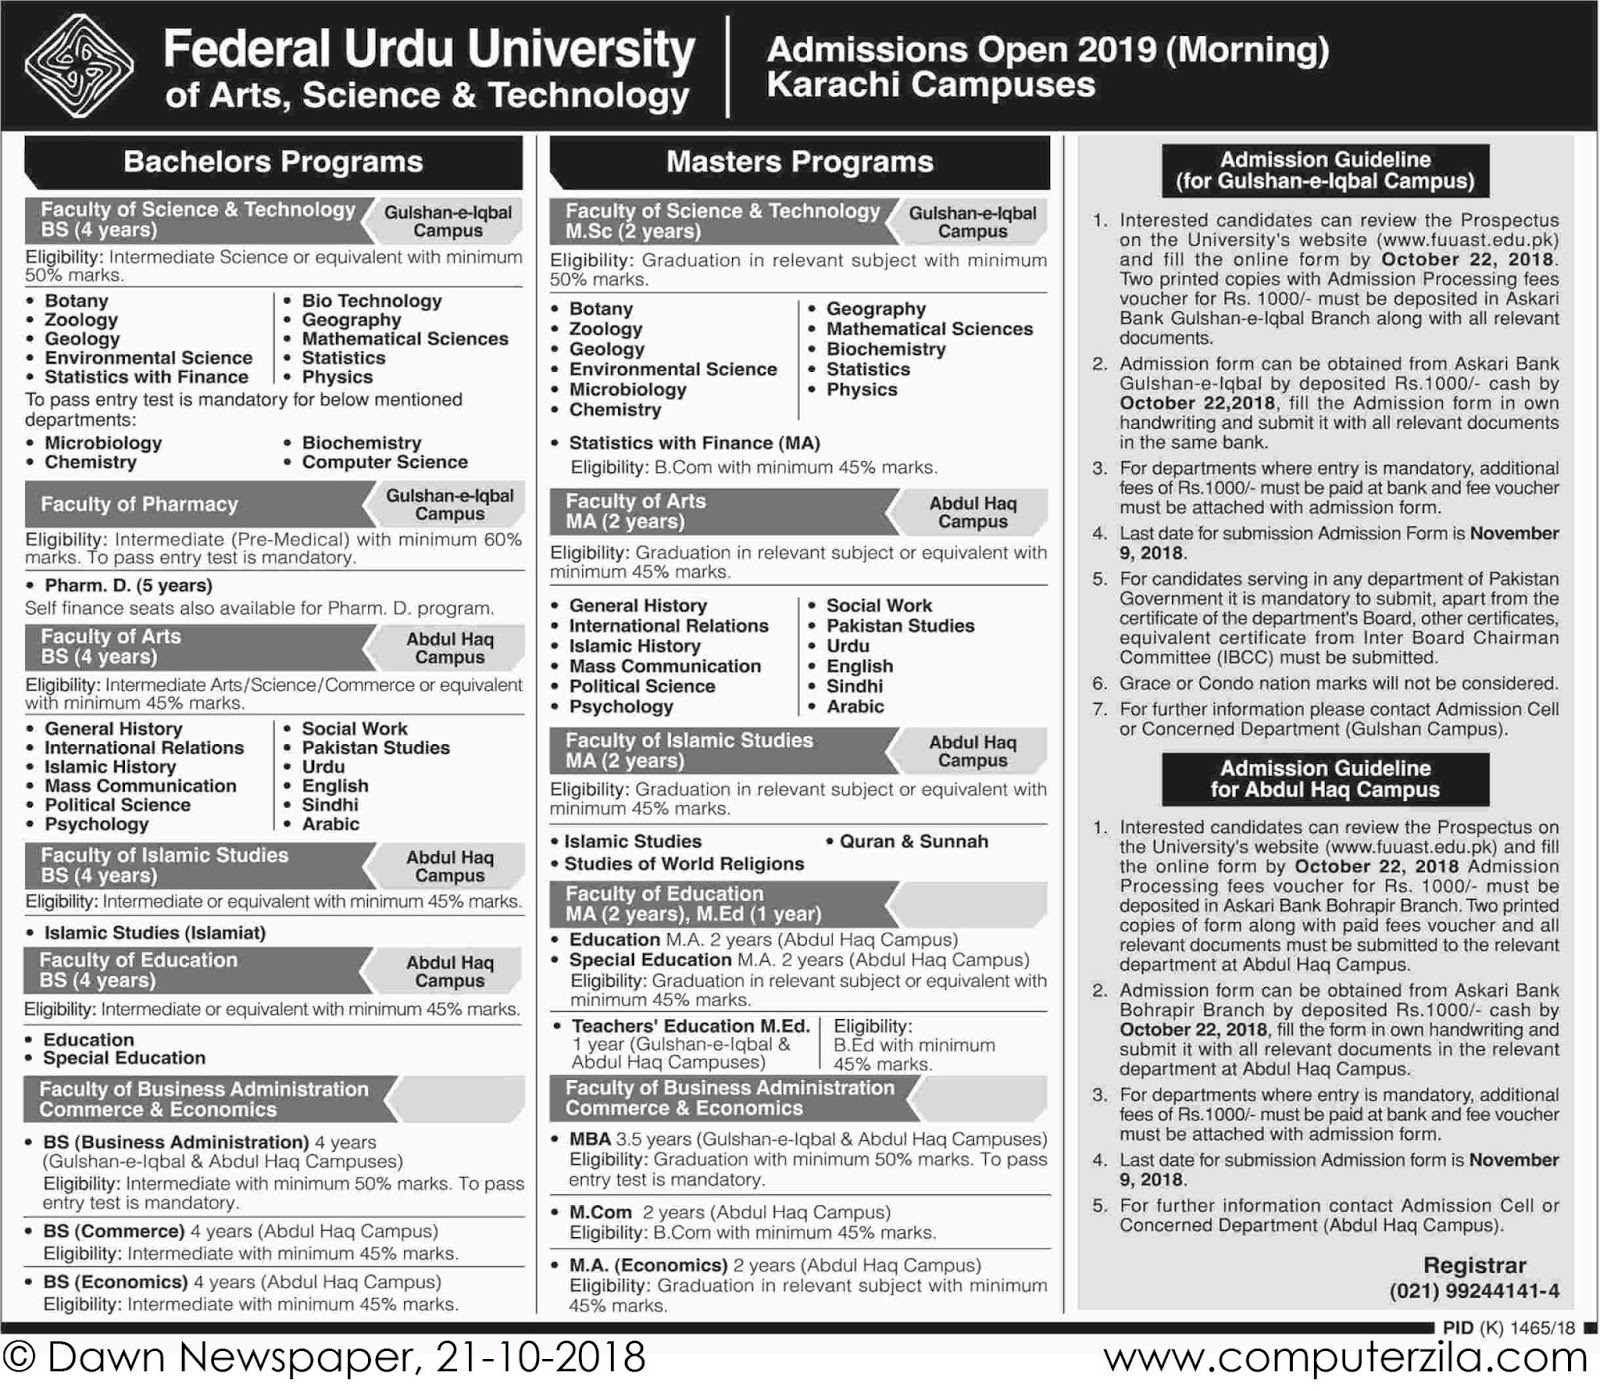 Admissions Open For Fall 2018 At FUUAST Karachi Campus